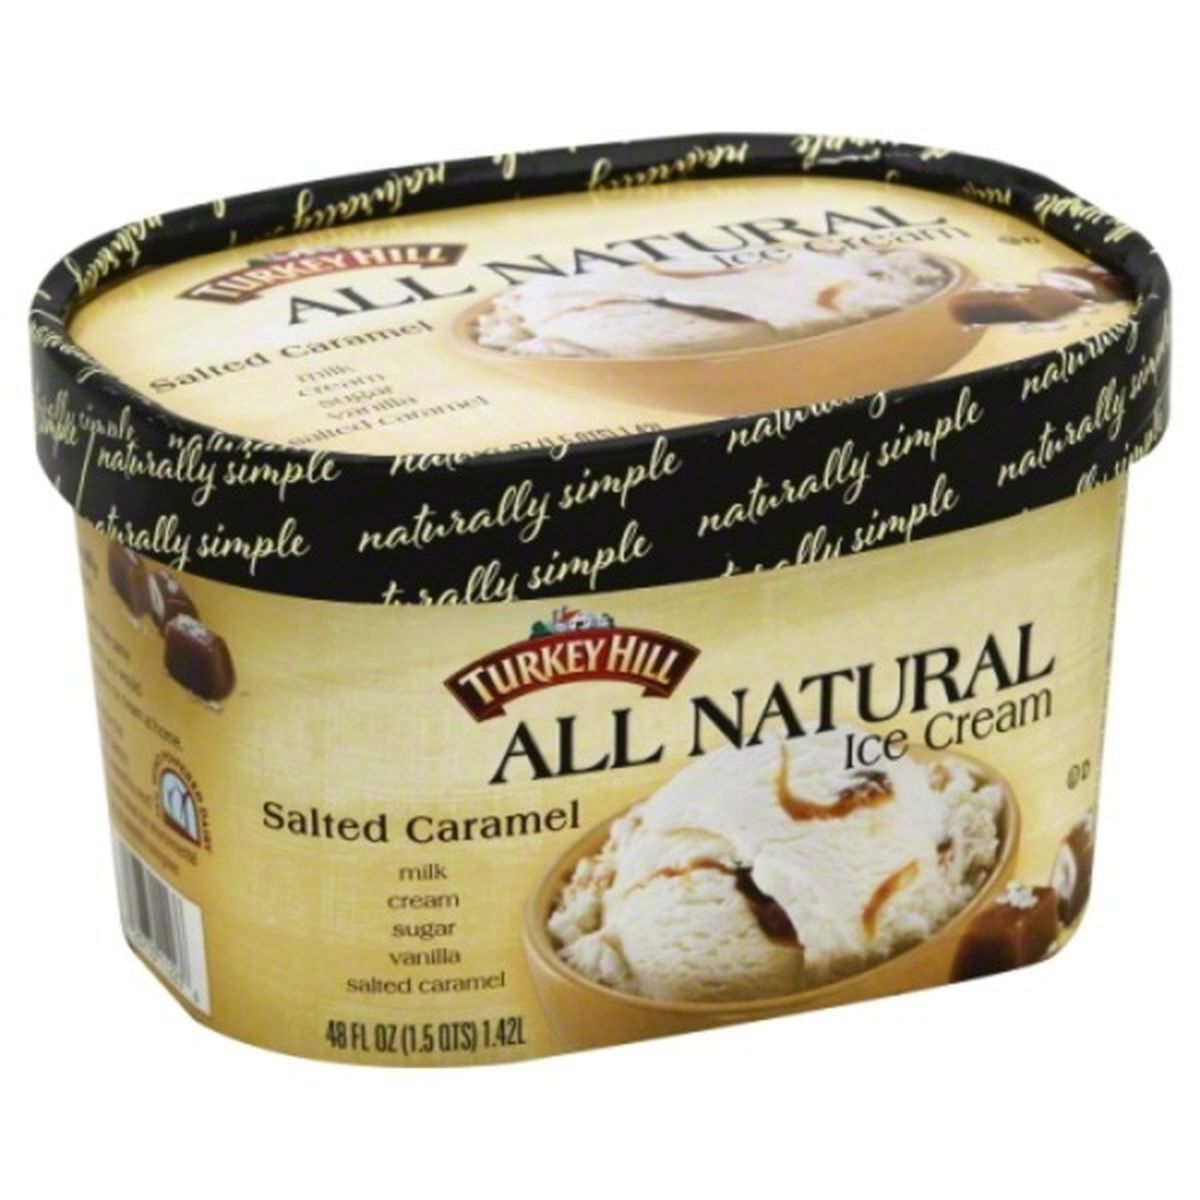 Calories in Turkey Hill Ice Cream, All Natural, Salted Caramel